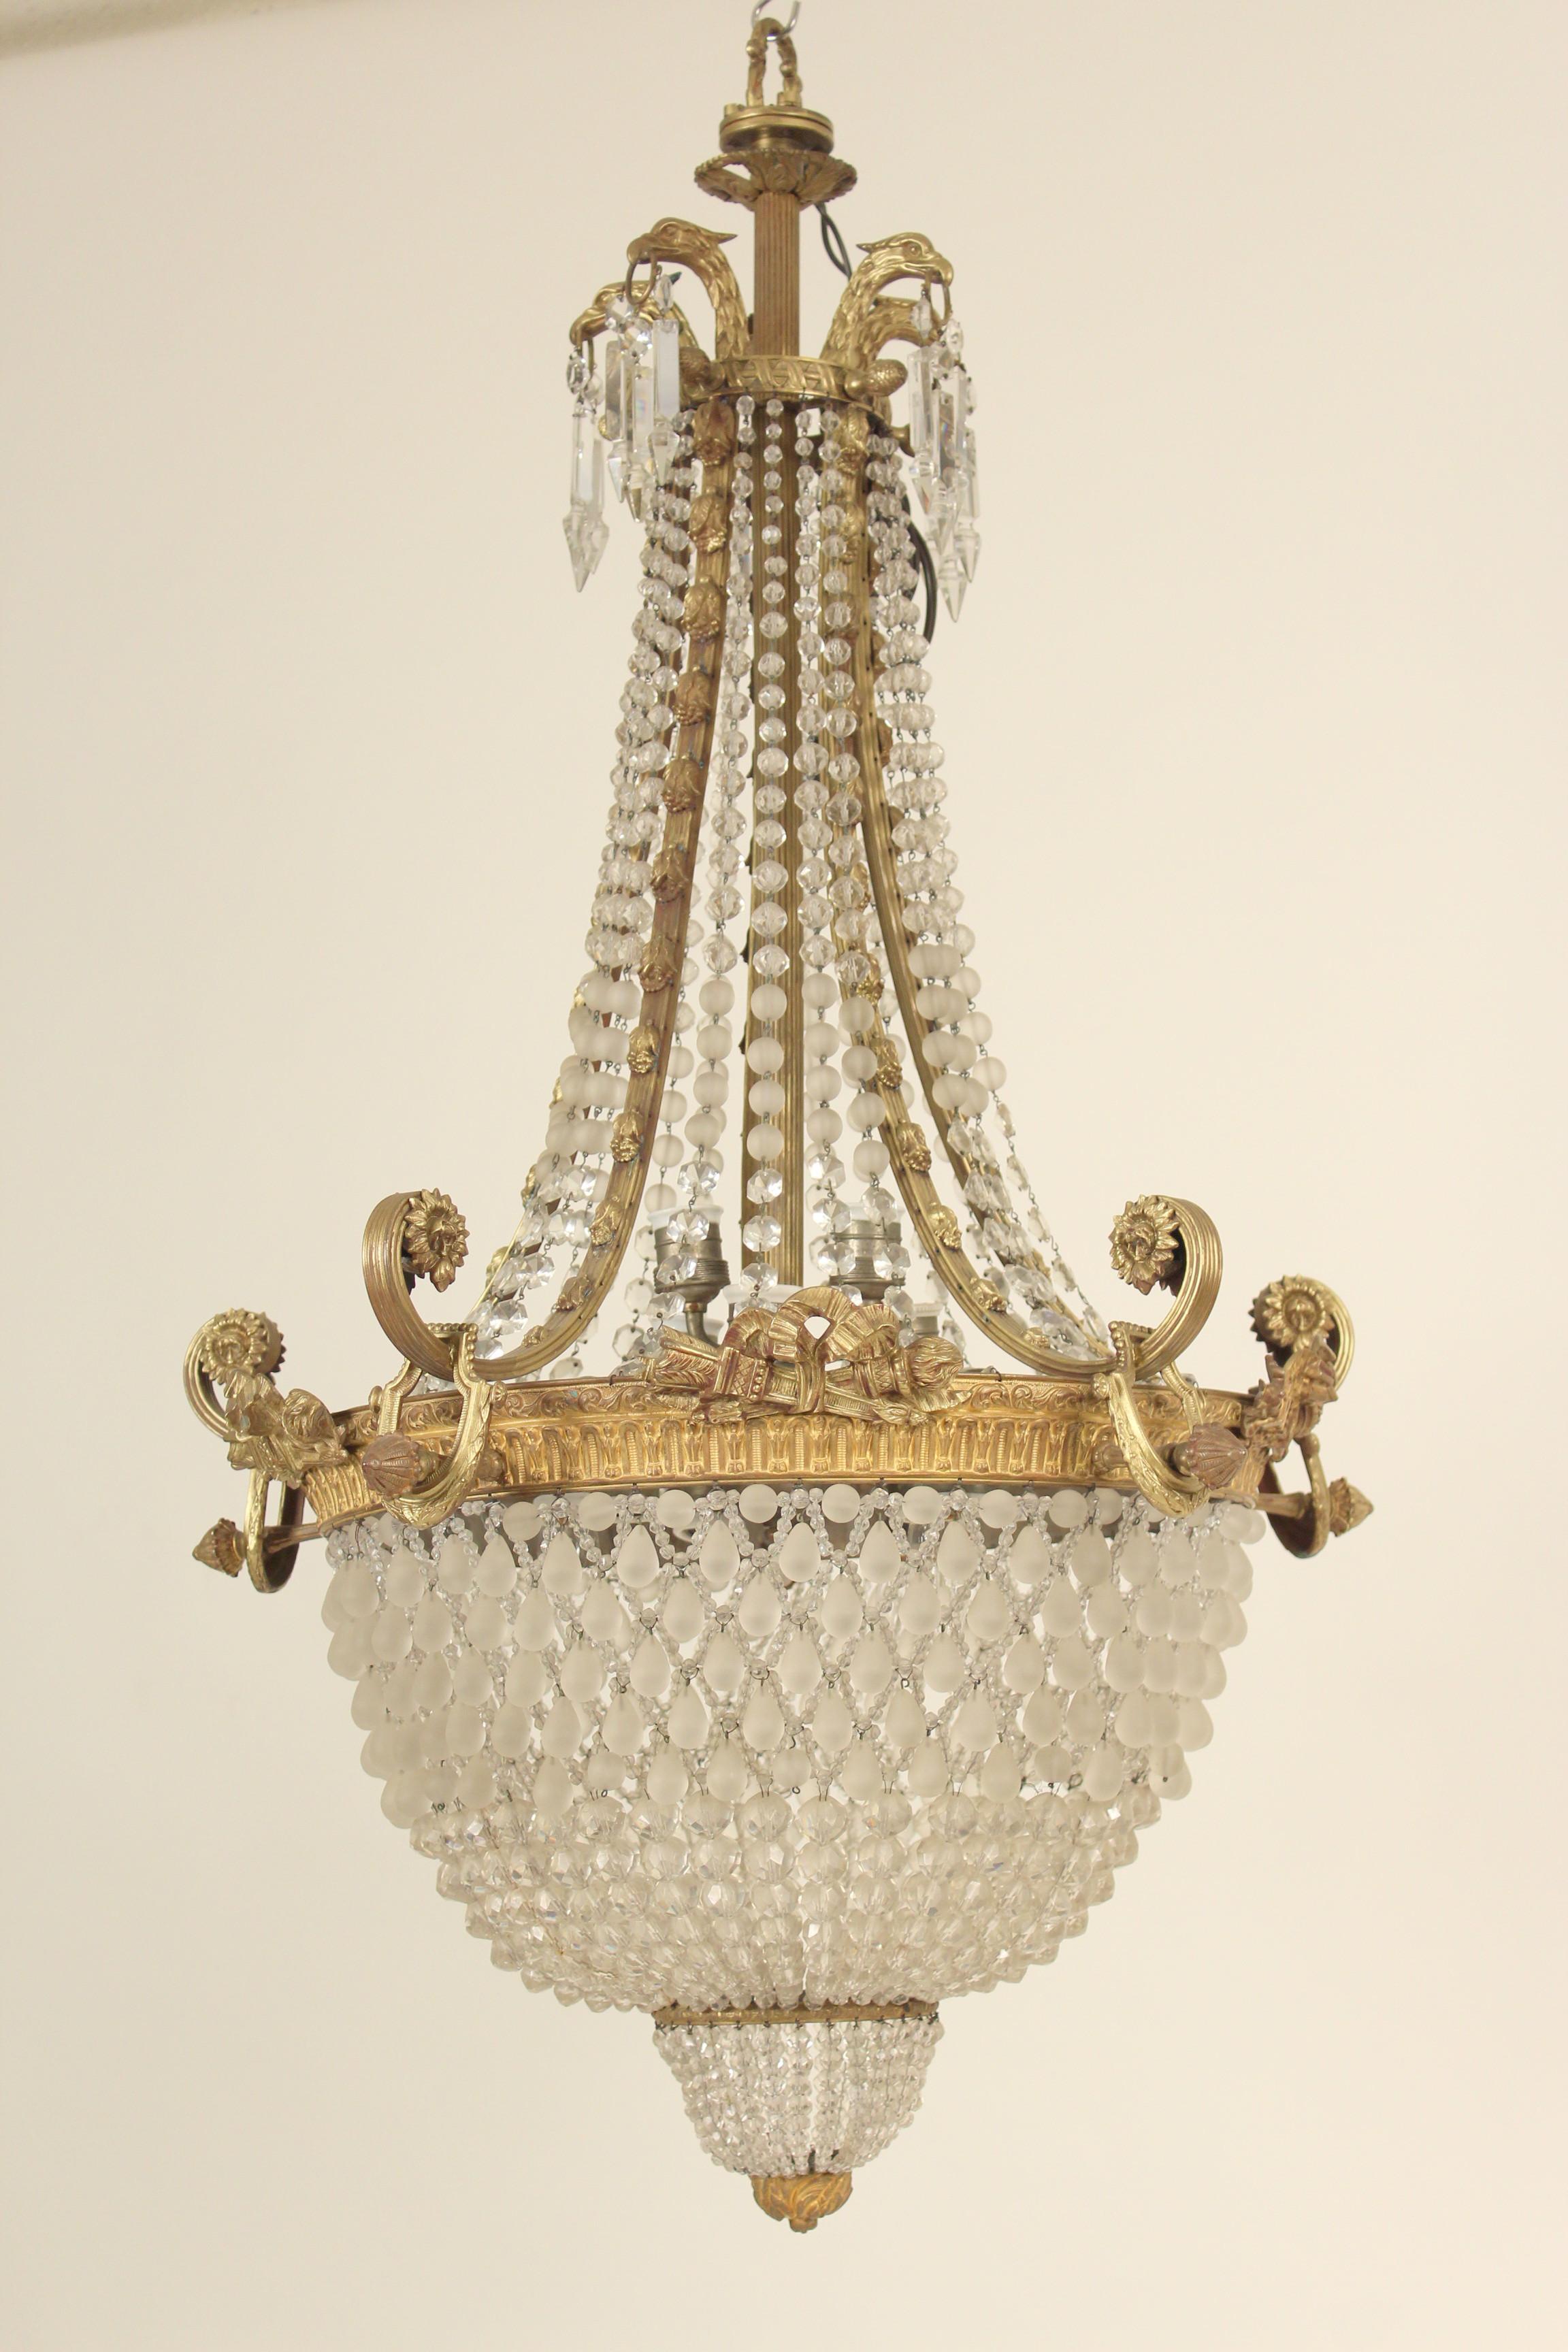 Neoclassical style gilt bronze, beaded crystal and frosted glass chandelier, with 10 interior lights, circa 1930s.